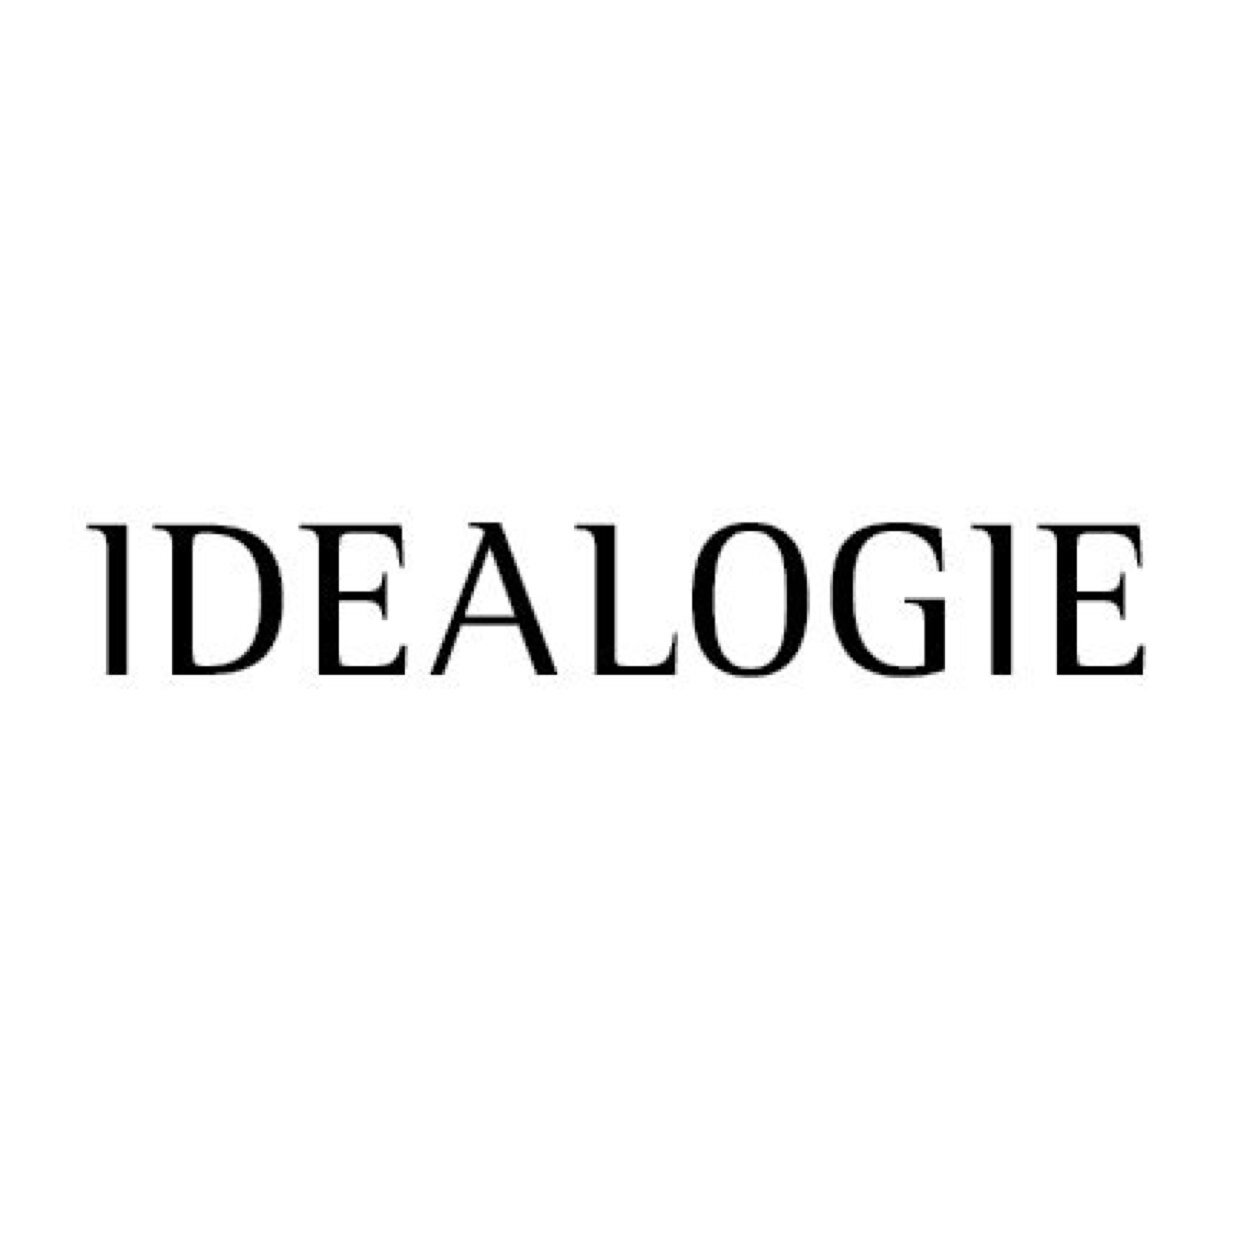 Idealogie is a multi-disciplinary studio that specializes in various fields such as design, branding, strategy, vfx, products, tech, and marketing. #idealogie